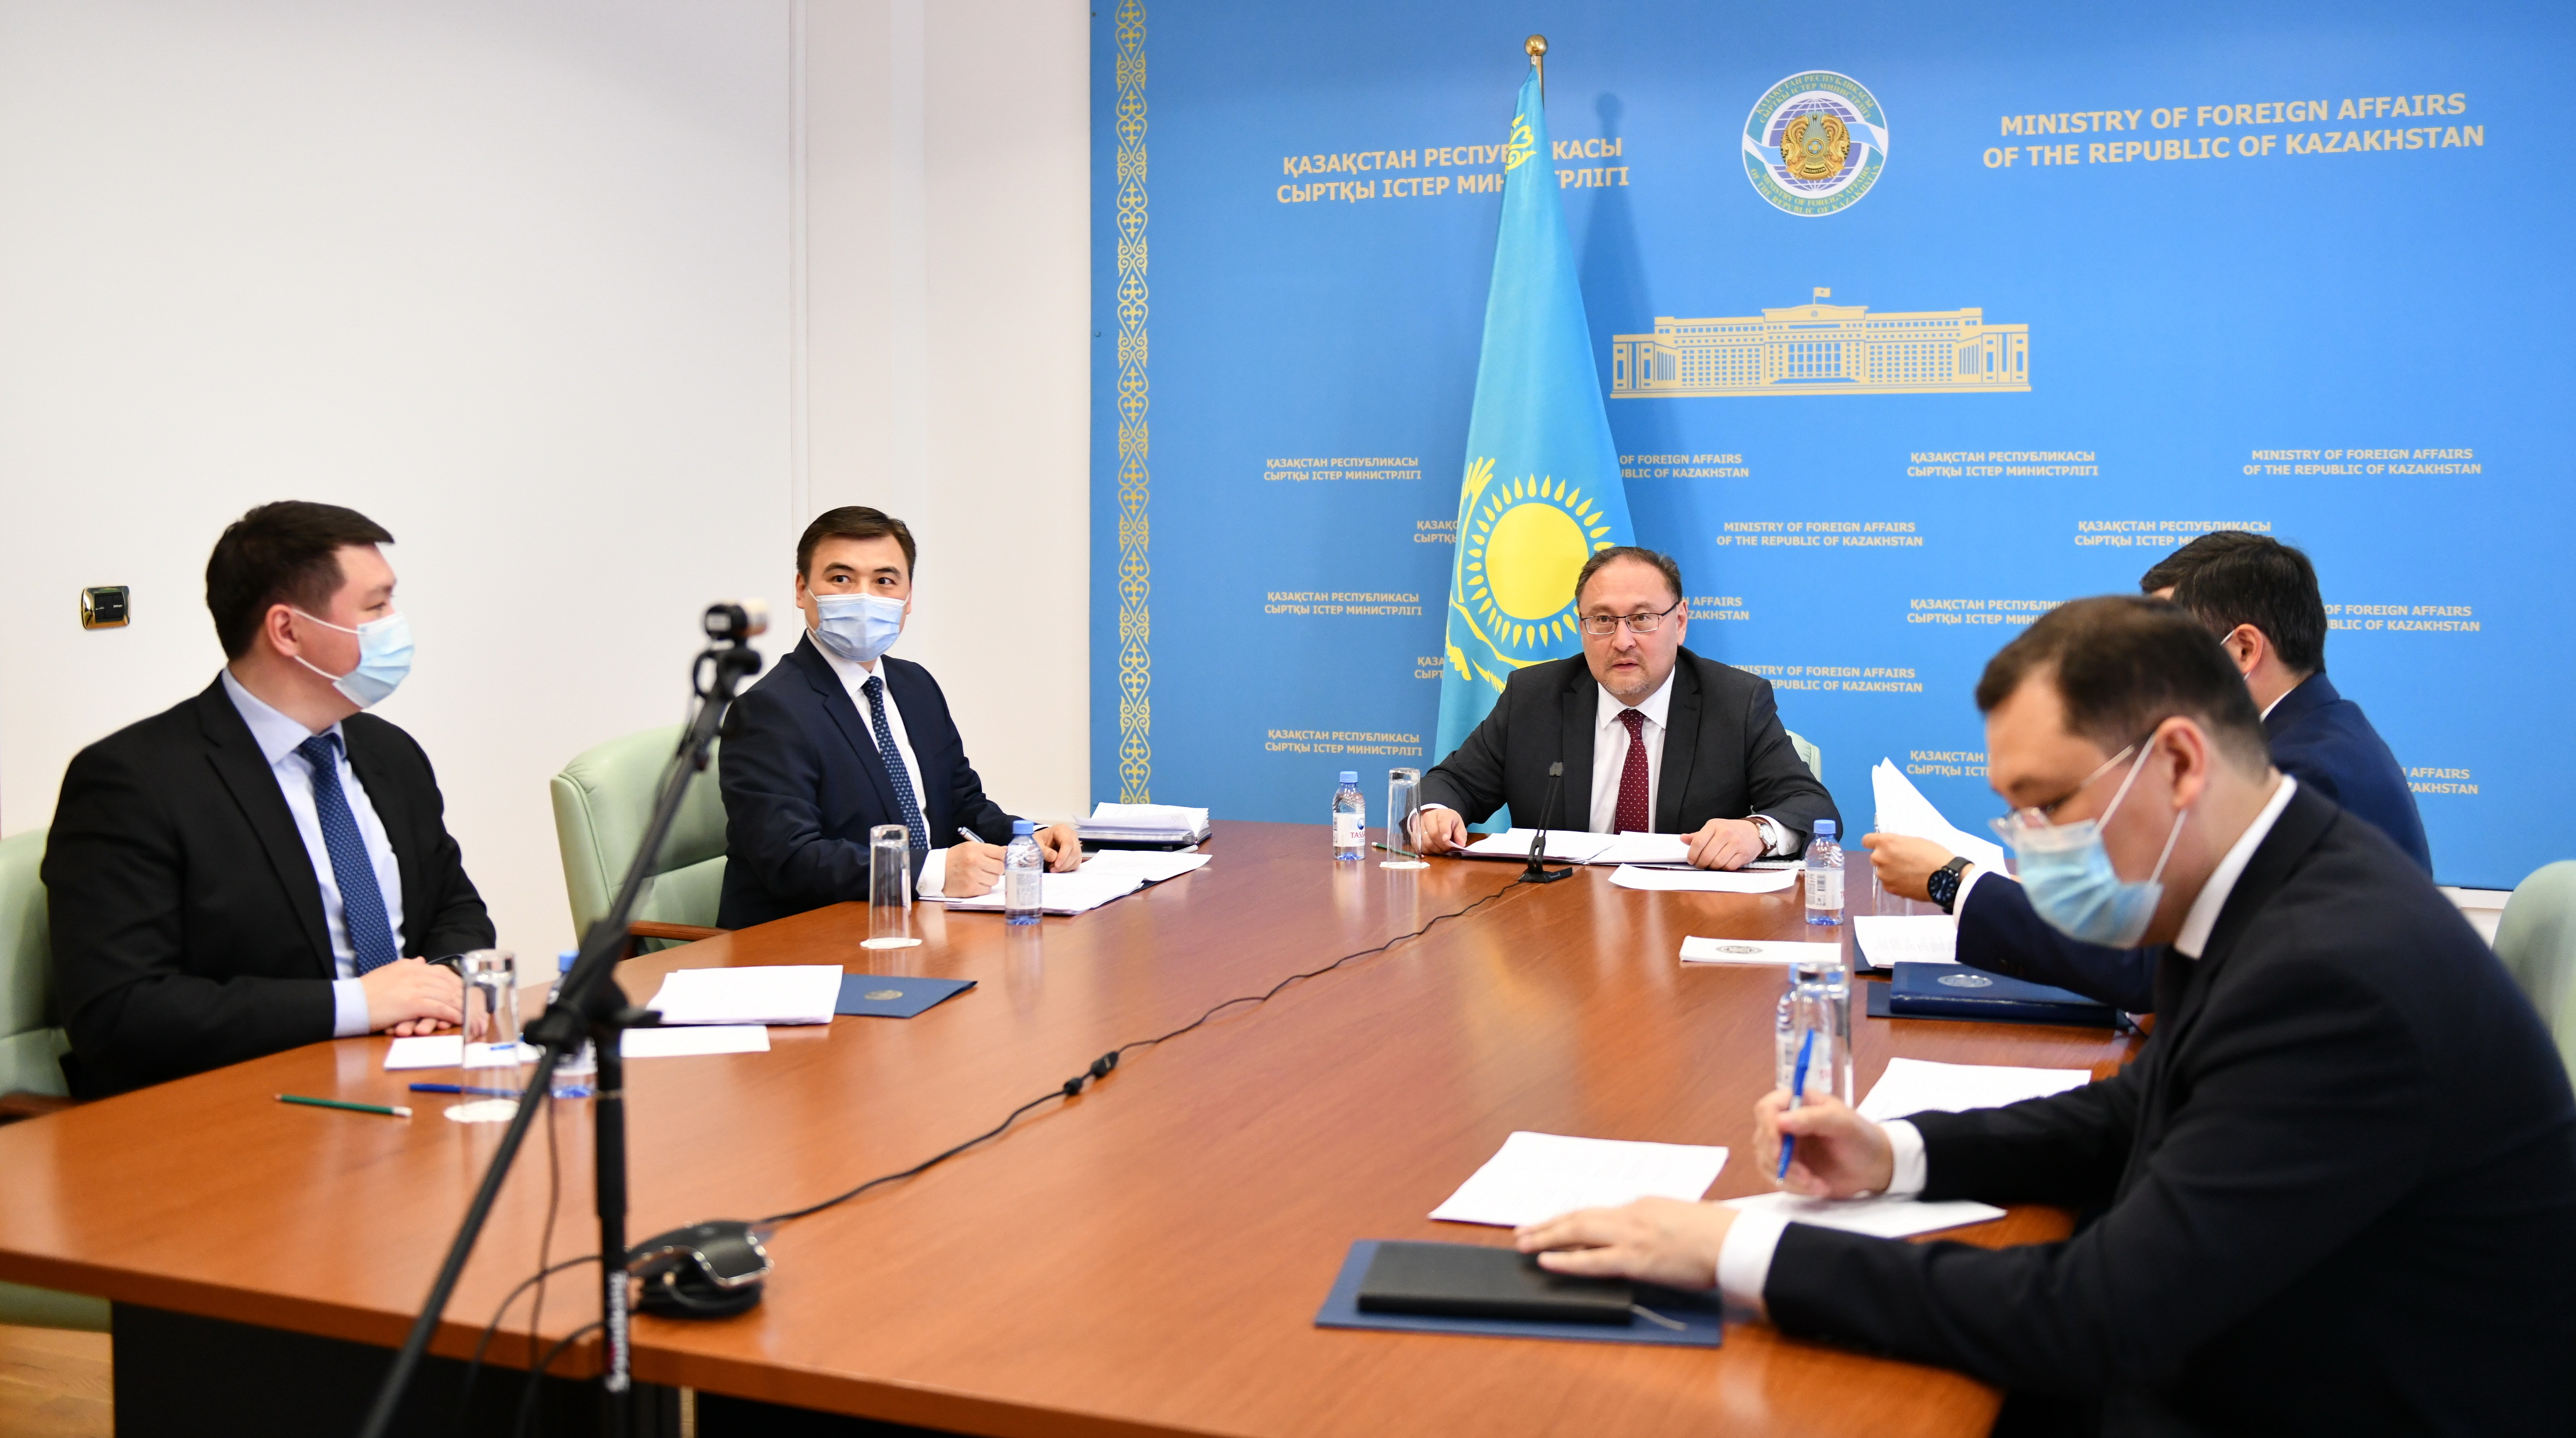 About the Conversation between the Deputy Minister of Foreign Affairs of Kazakhstan and US Acting Assistant Secretary